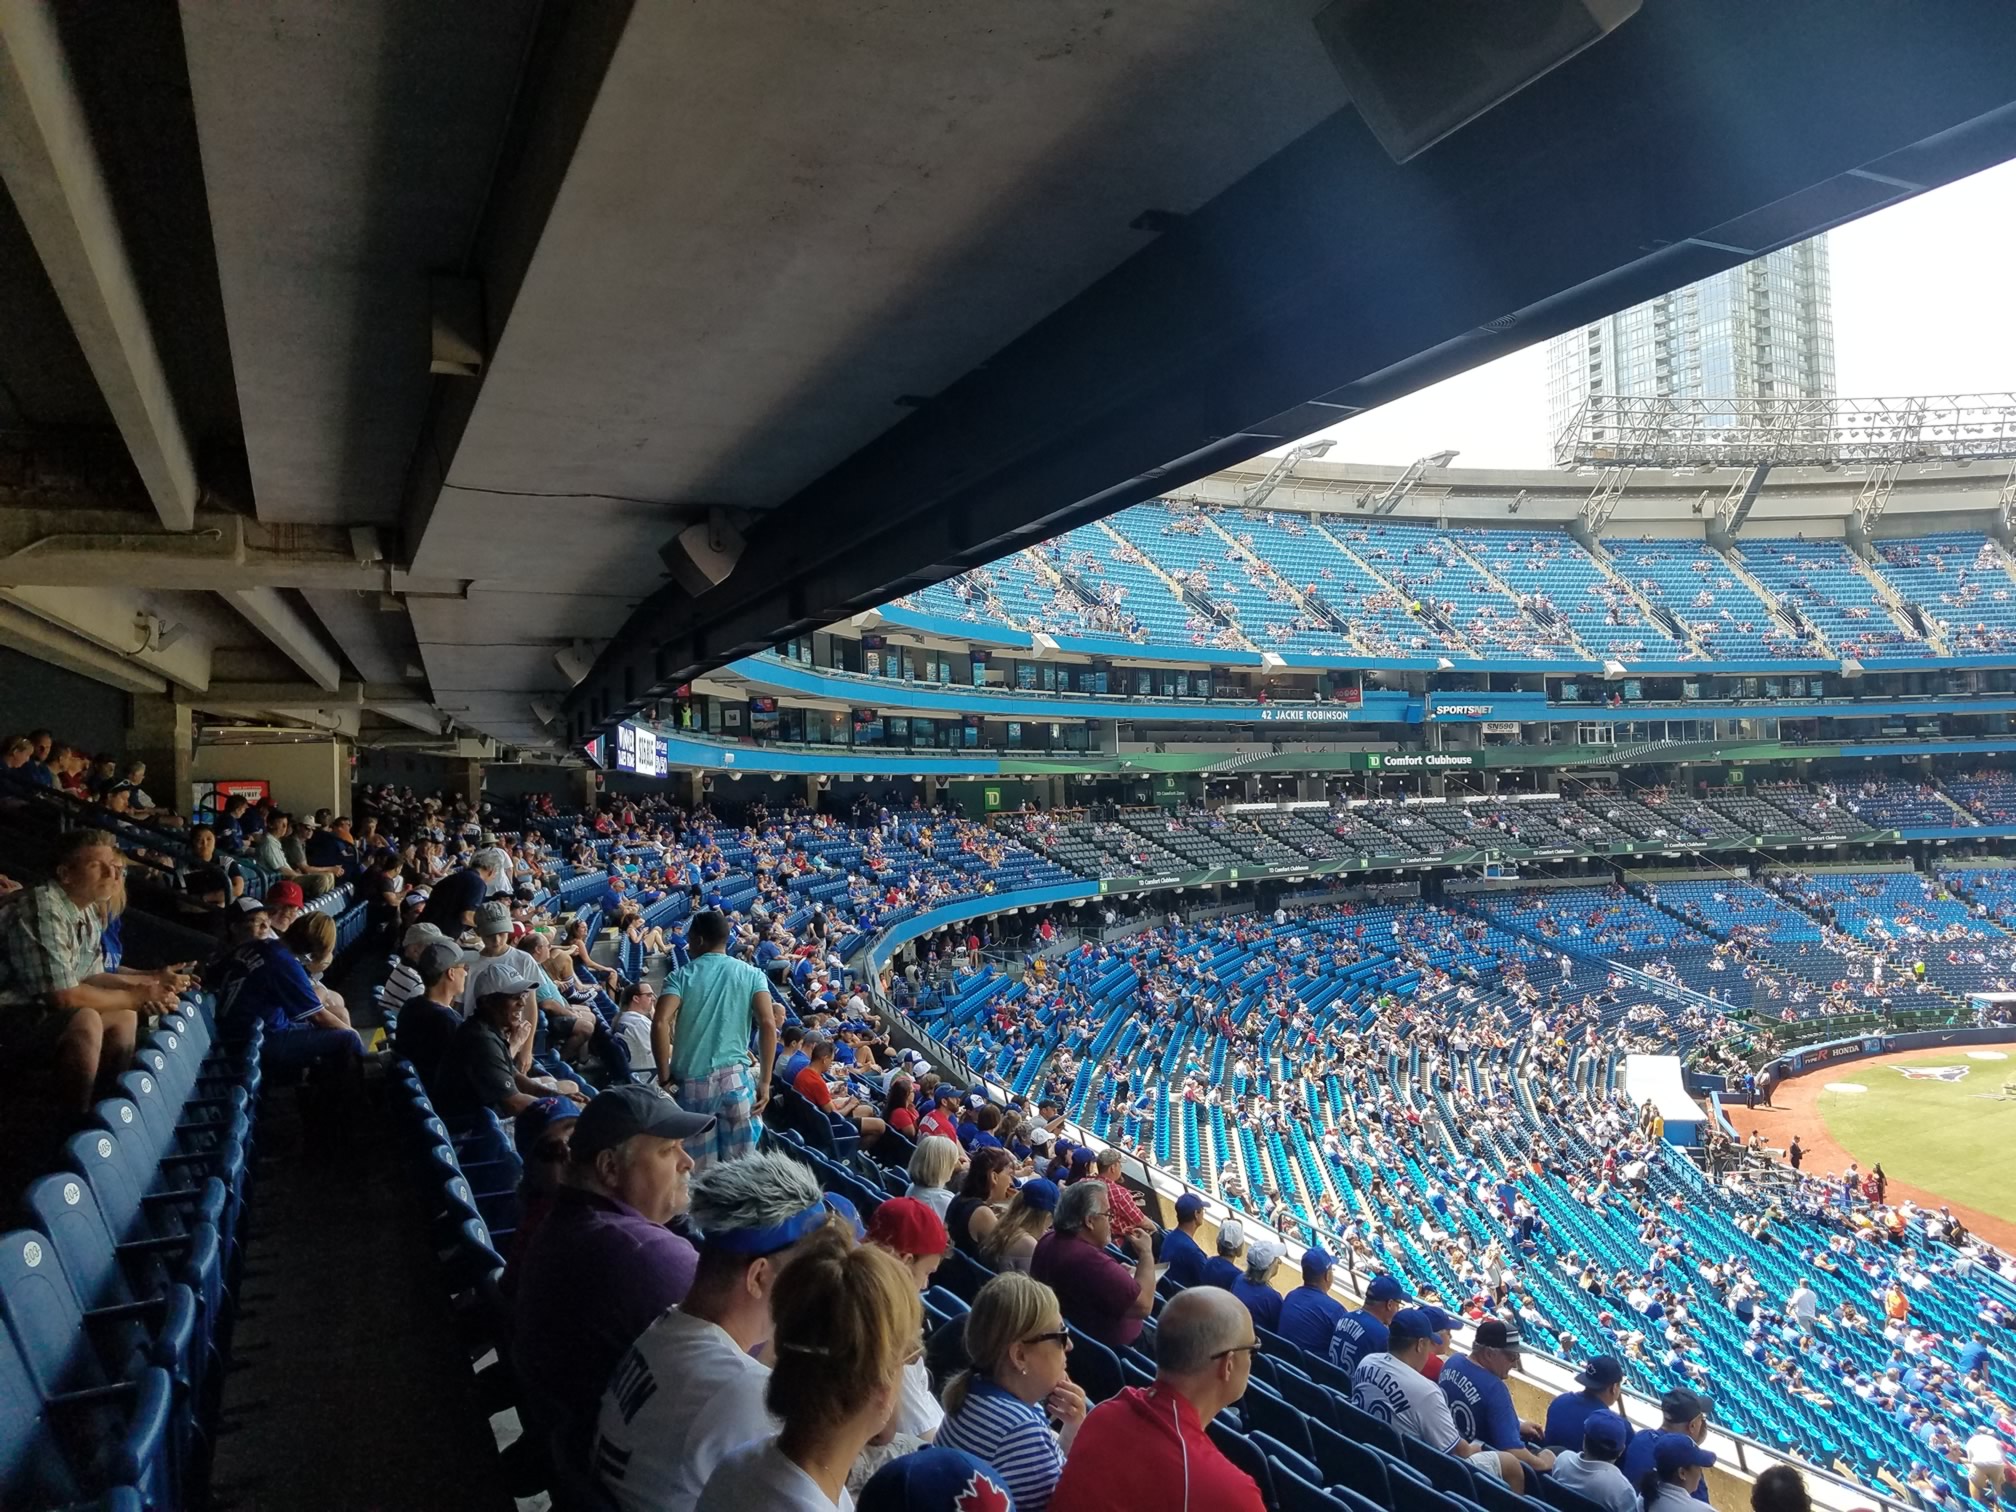 Section 220 at Rogers Centre 